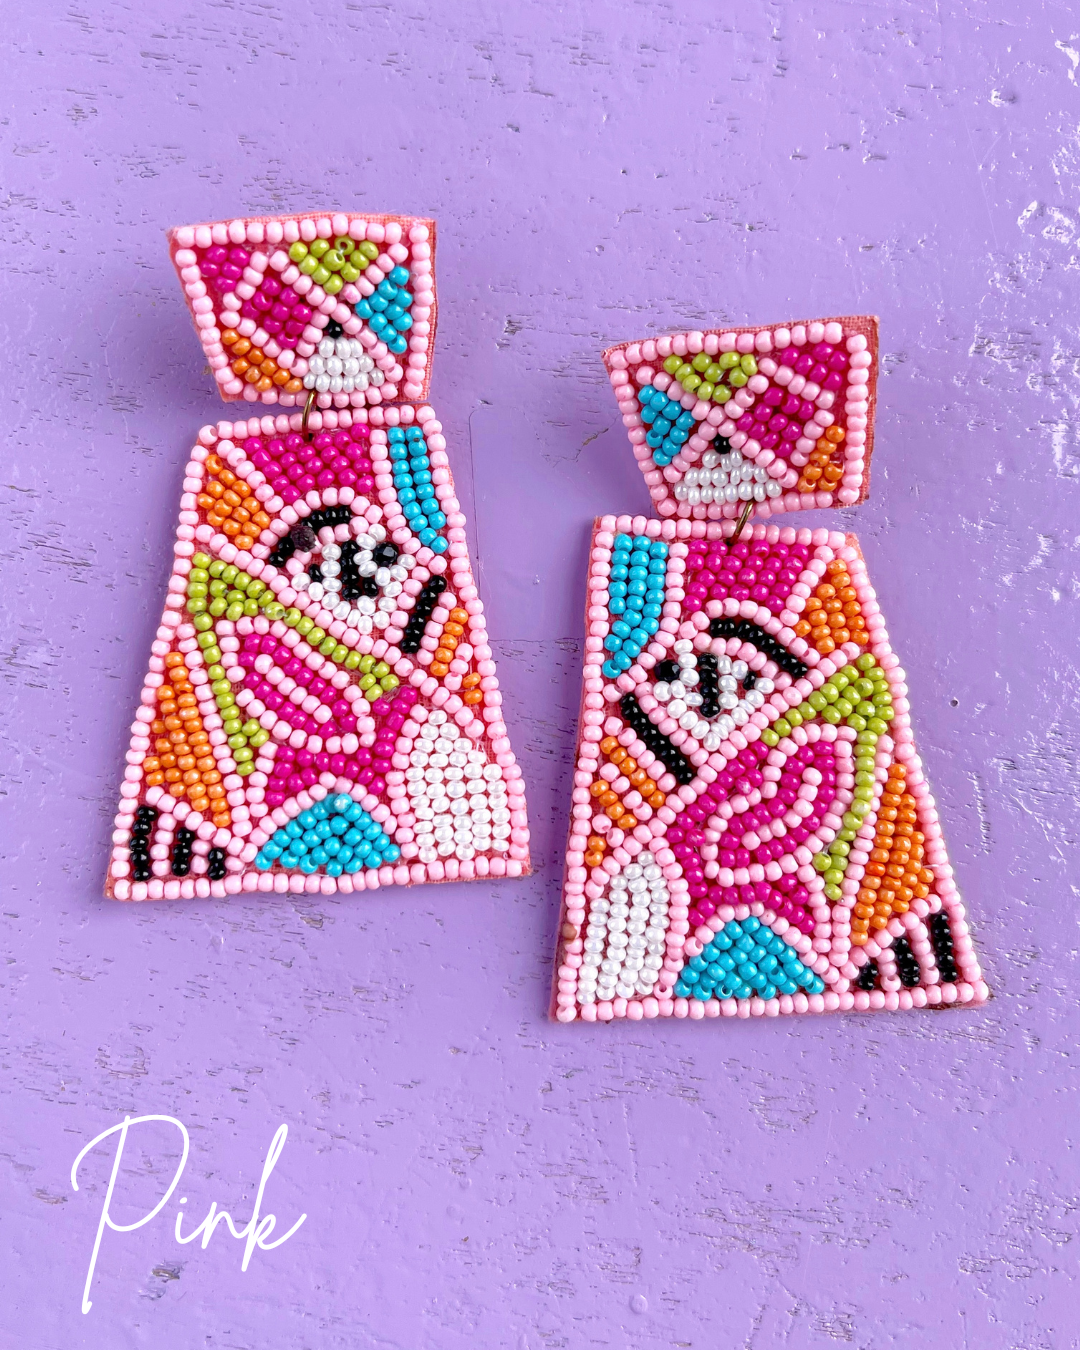 California Dreamin' Earrings-Seed Beed Earring-Golden Stella-The Village Shoppe, Women’s Fashion Boutique, Shop Online and In Store - Located in Muscle Shoals, AL.